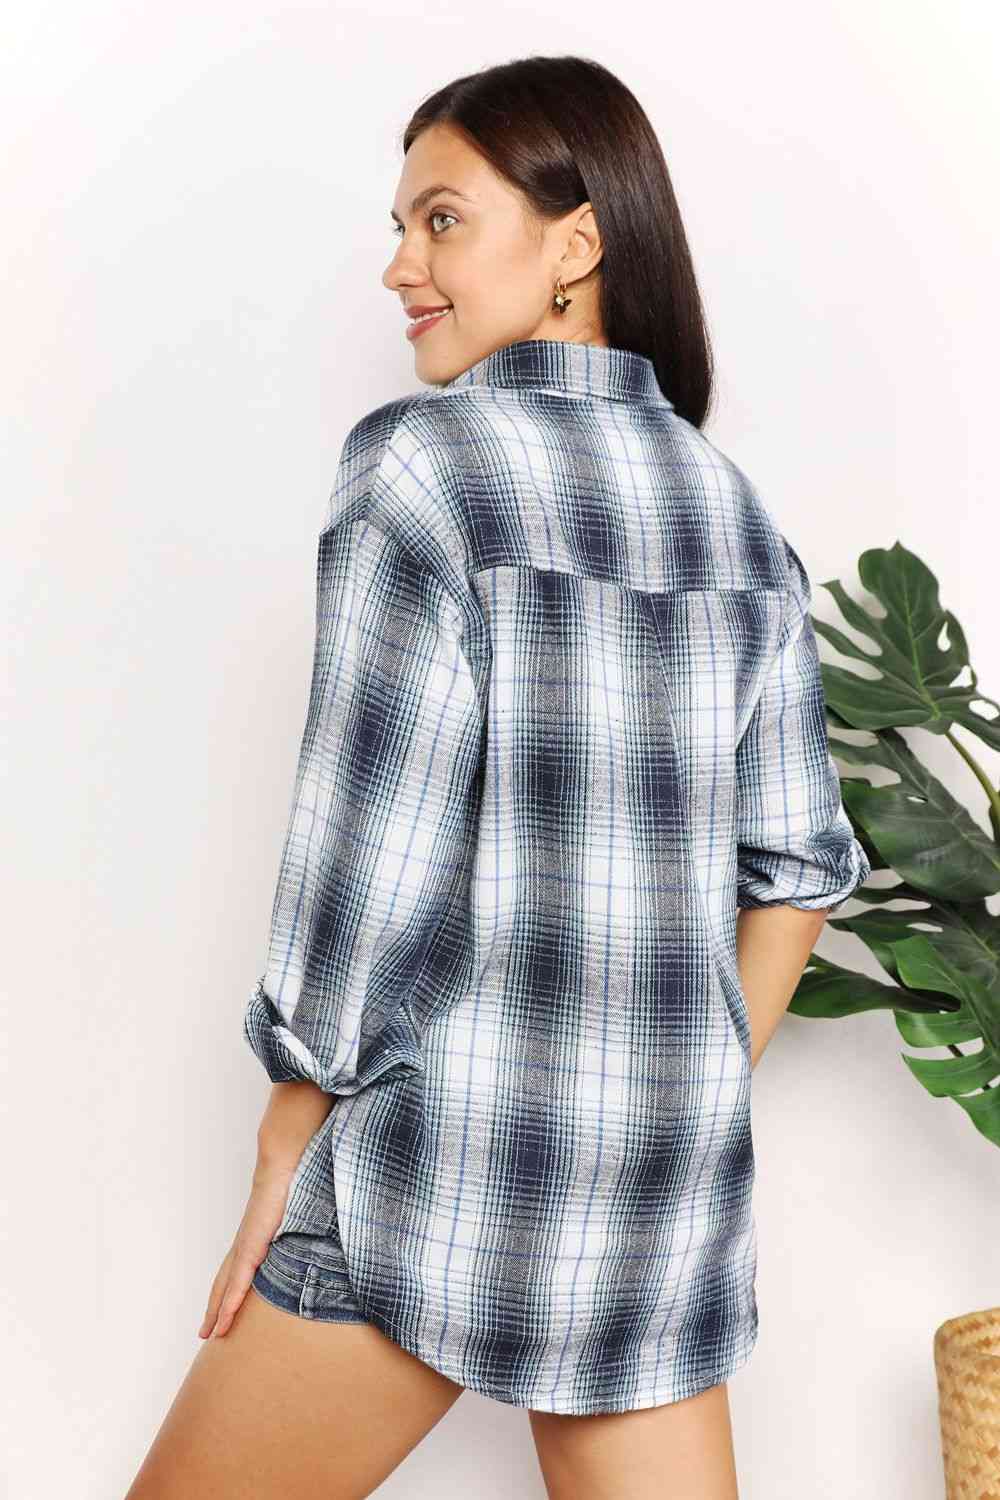 Double Take Plaid Dropped Shoulder Shirt choice of colors